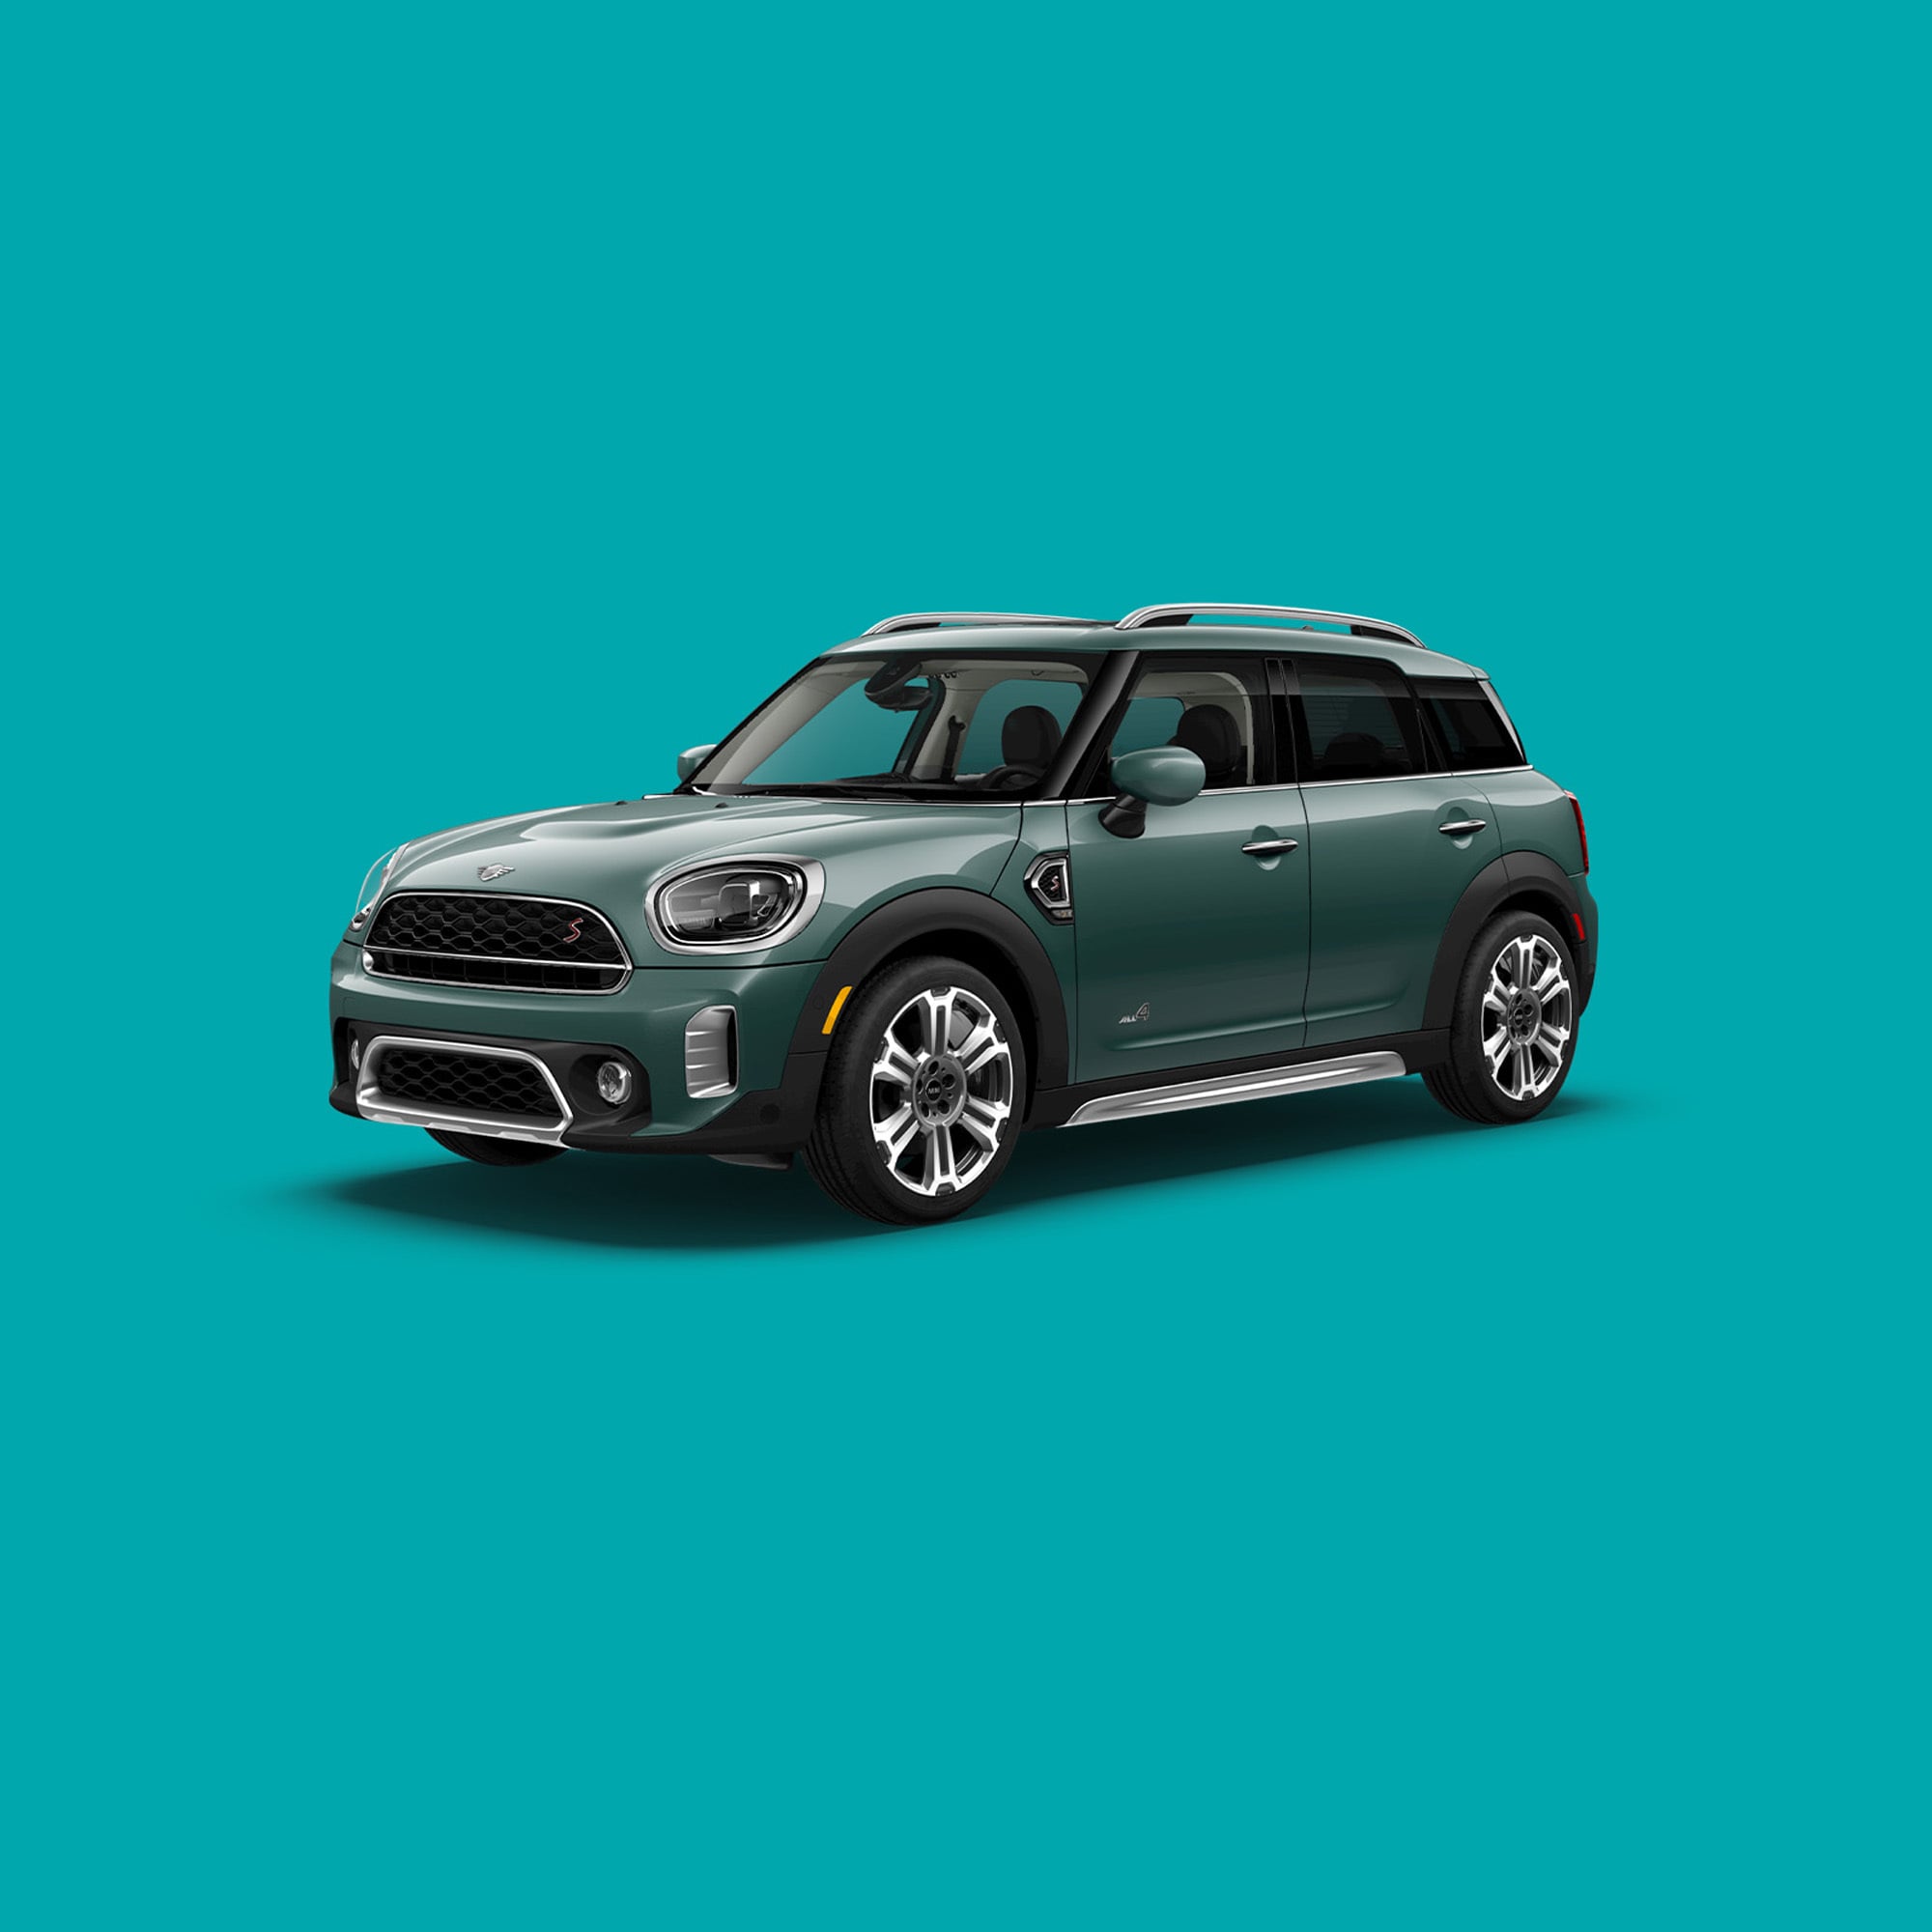 Angled front-to-rear view of a MINI Countryman S ALL4 in Sage Green metallic, against a turquoise backdrop.